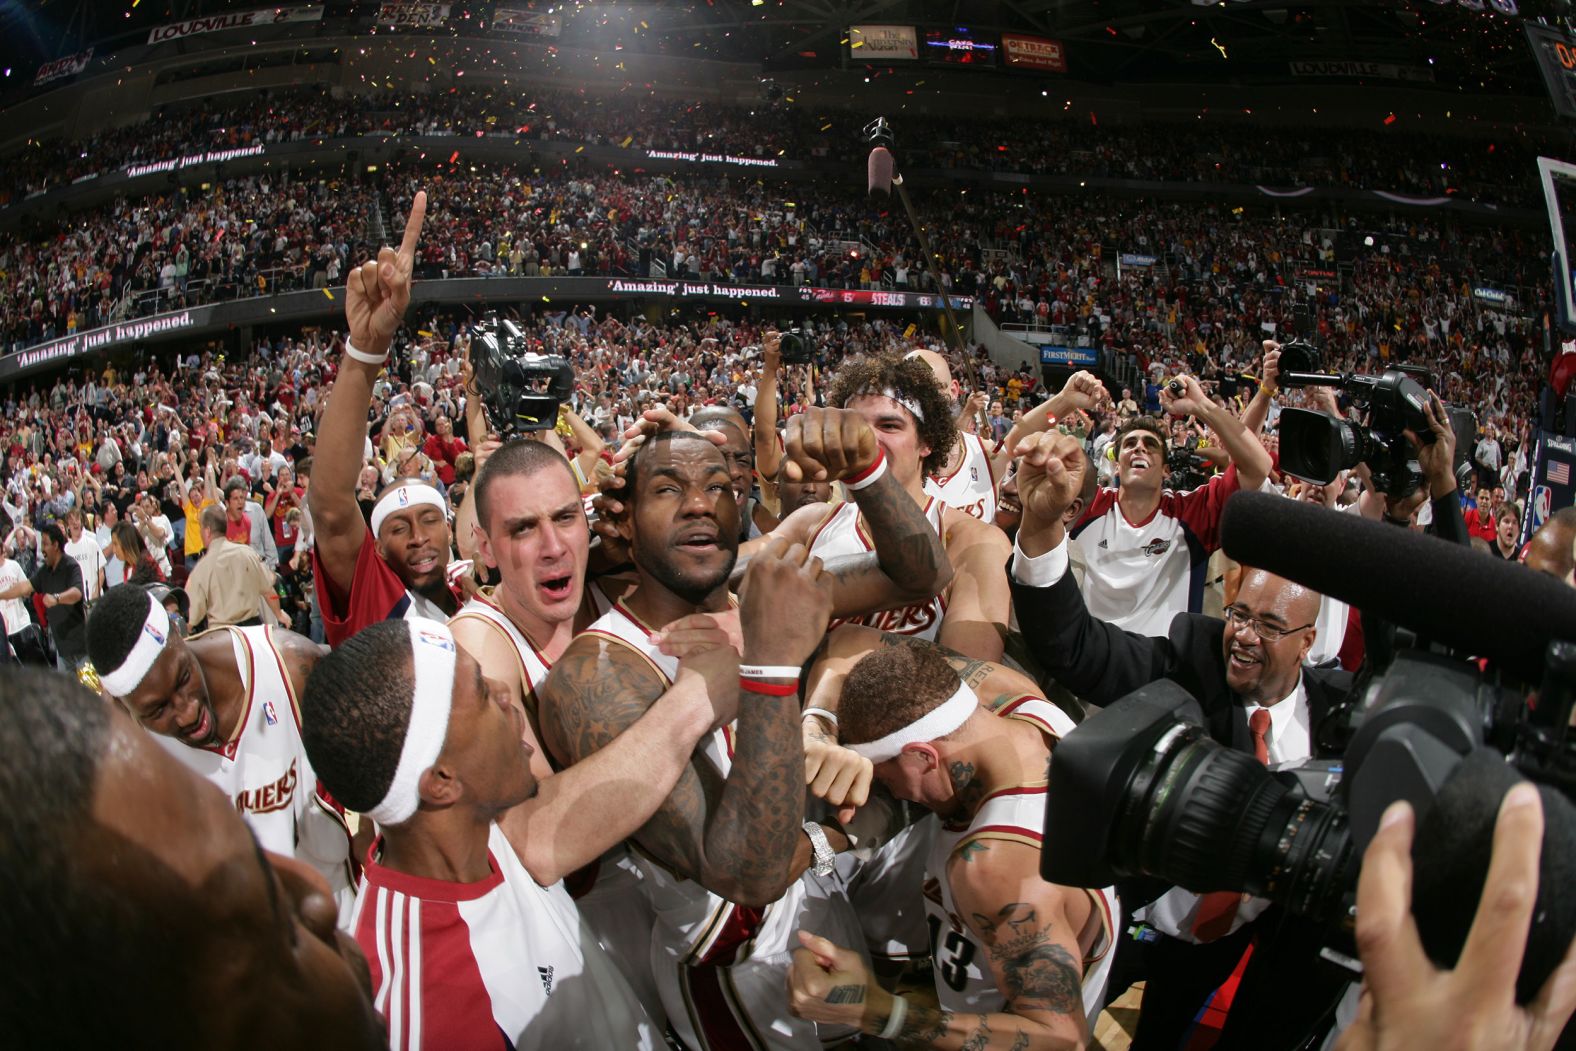 James celebrates after hitting a game-winning shot to win a playoff game against Orlando in May 2009.